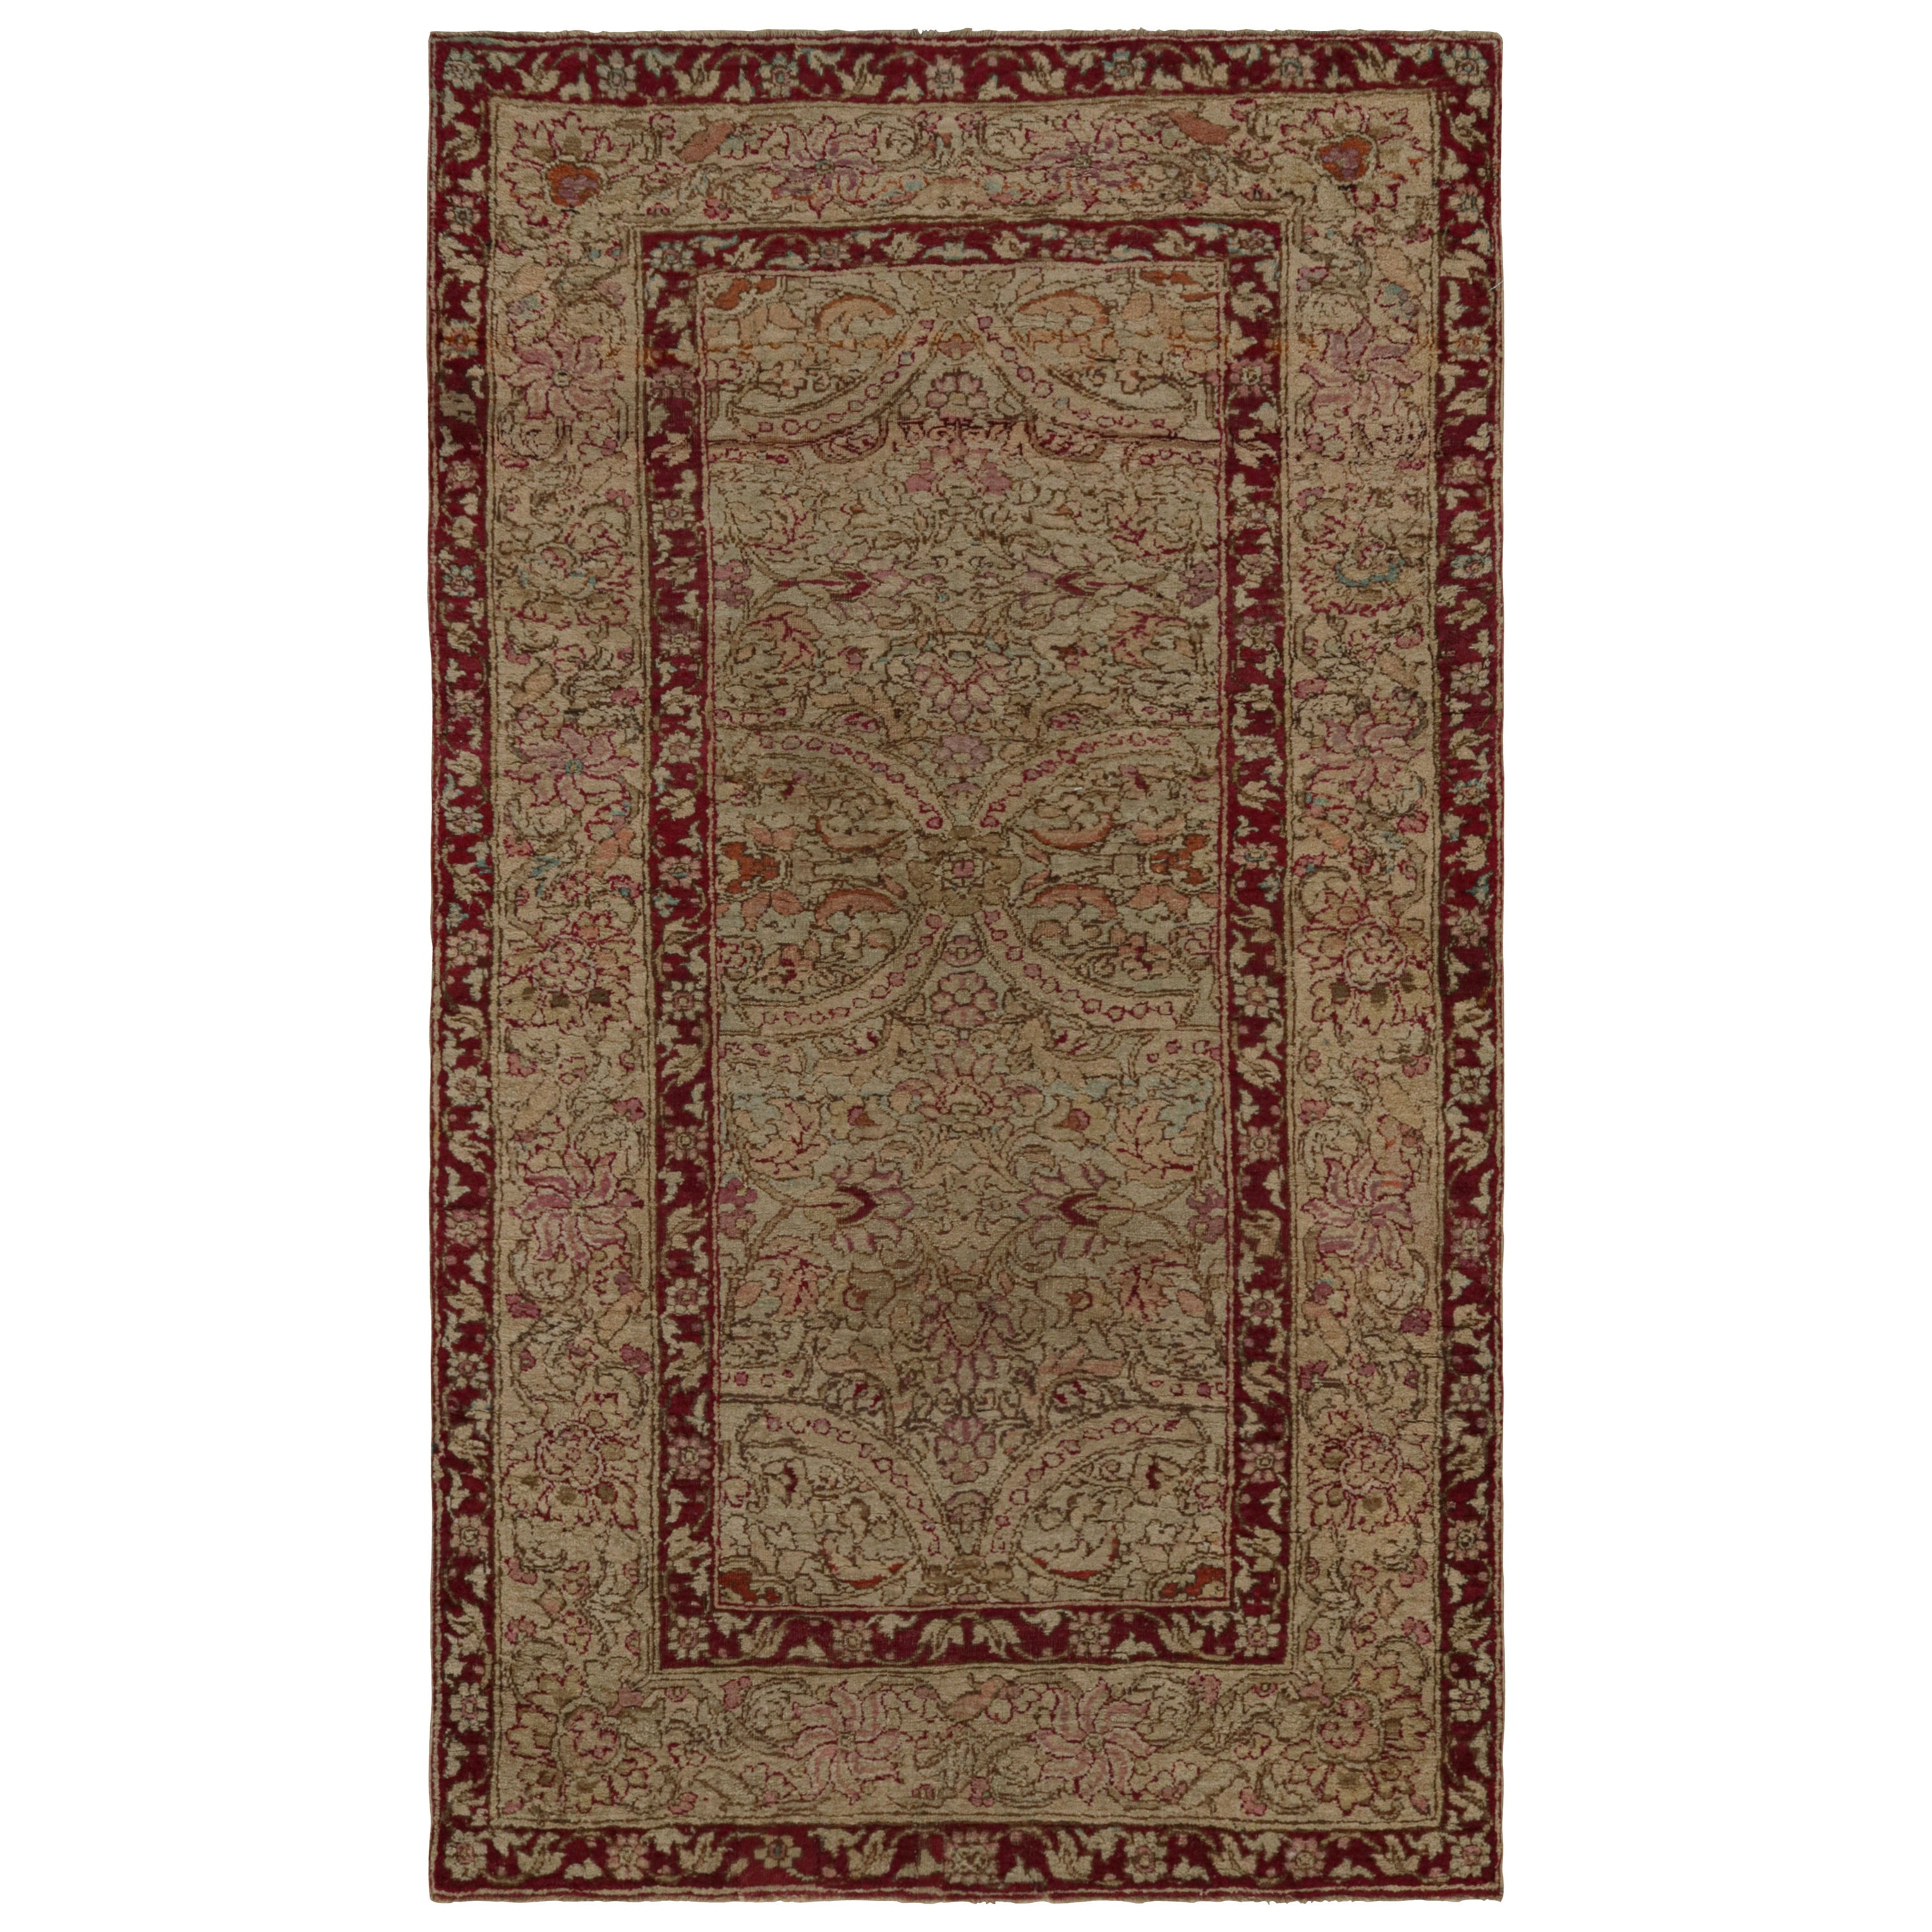 Antique Agra rug with Geometric Patterns in Brown and Red, from Rug & Kilim For Sale